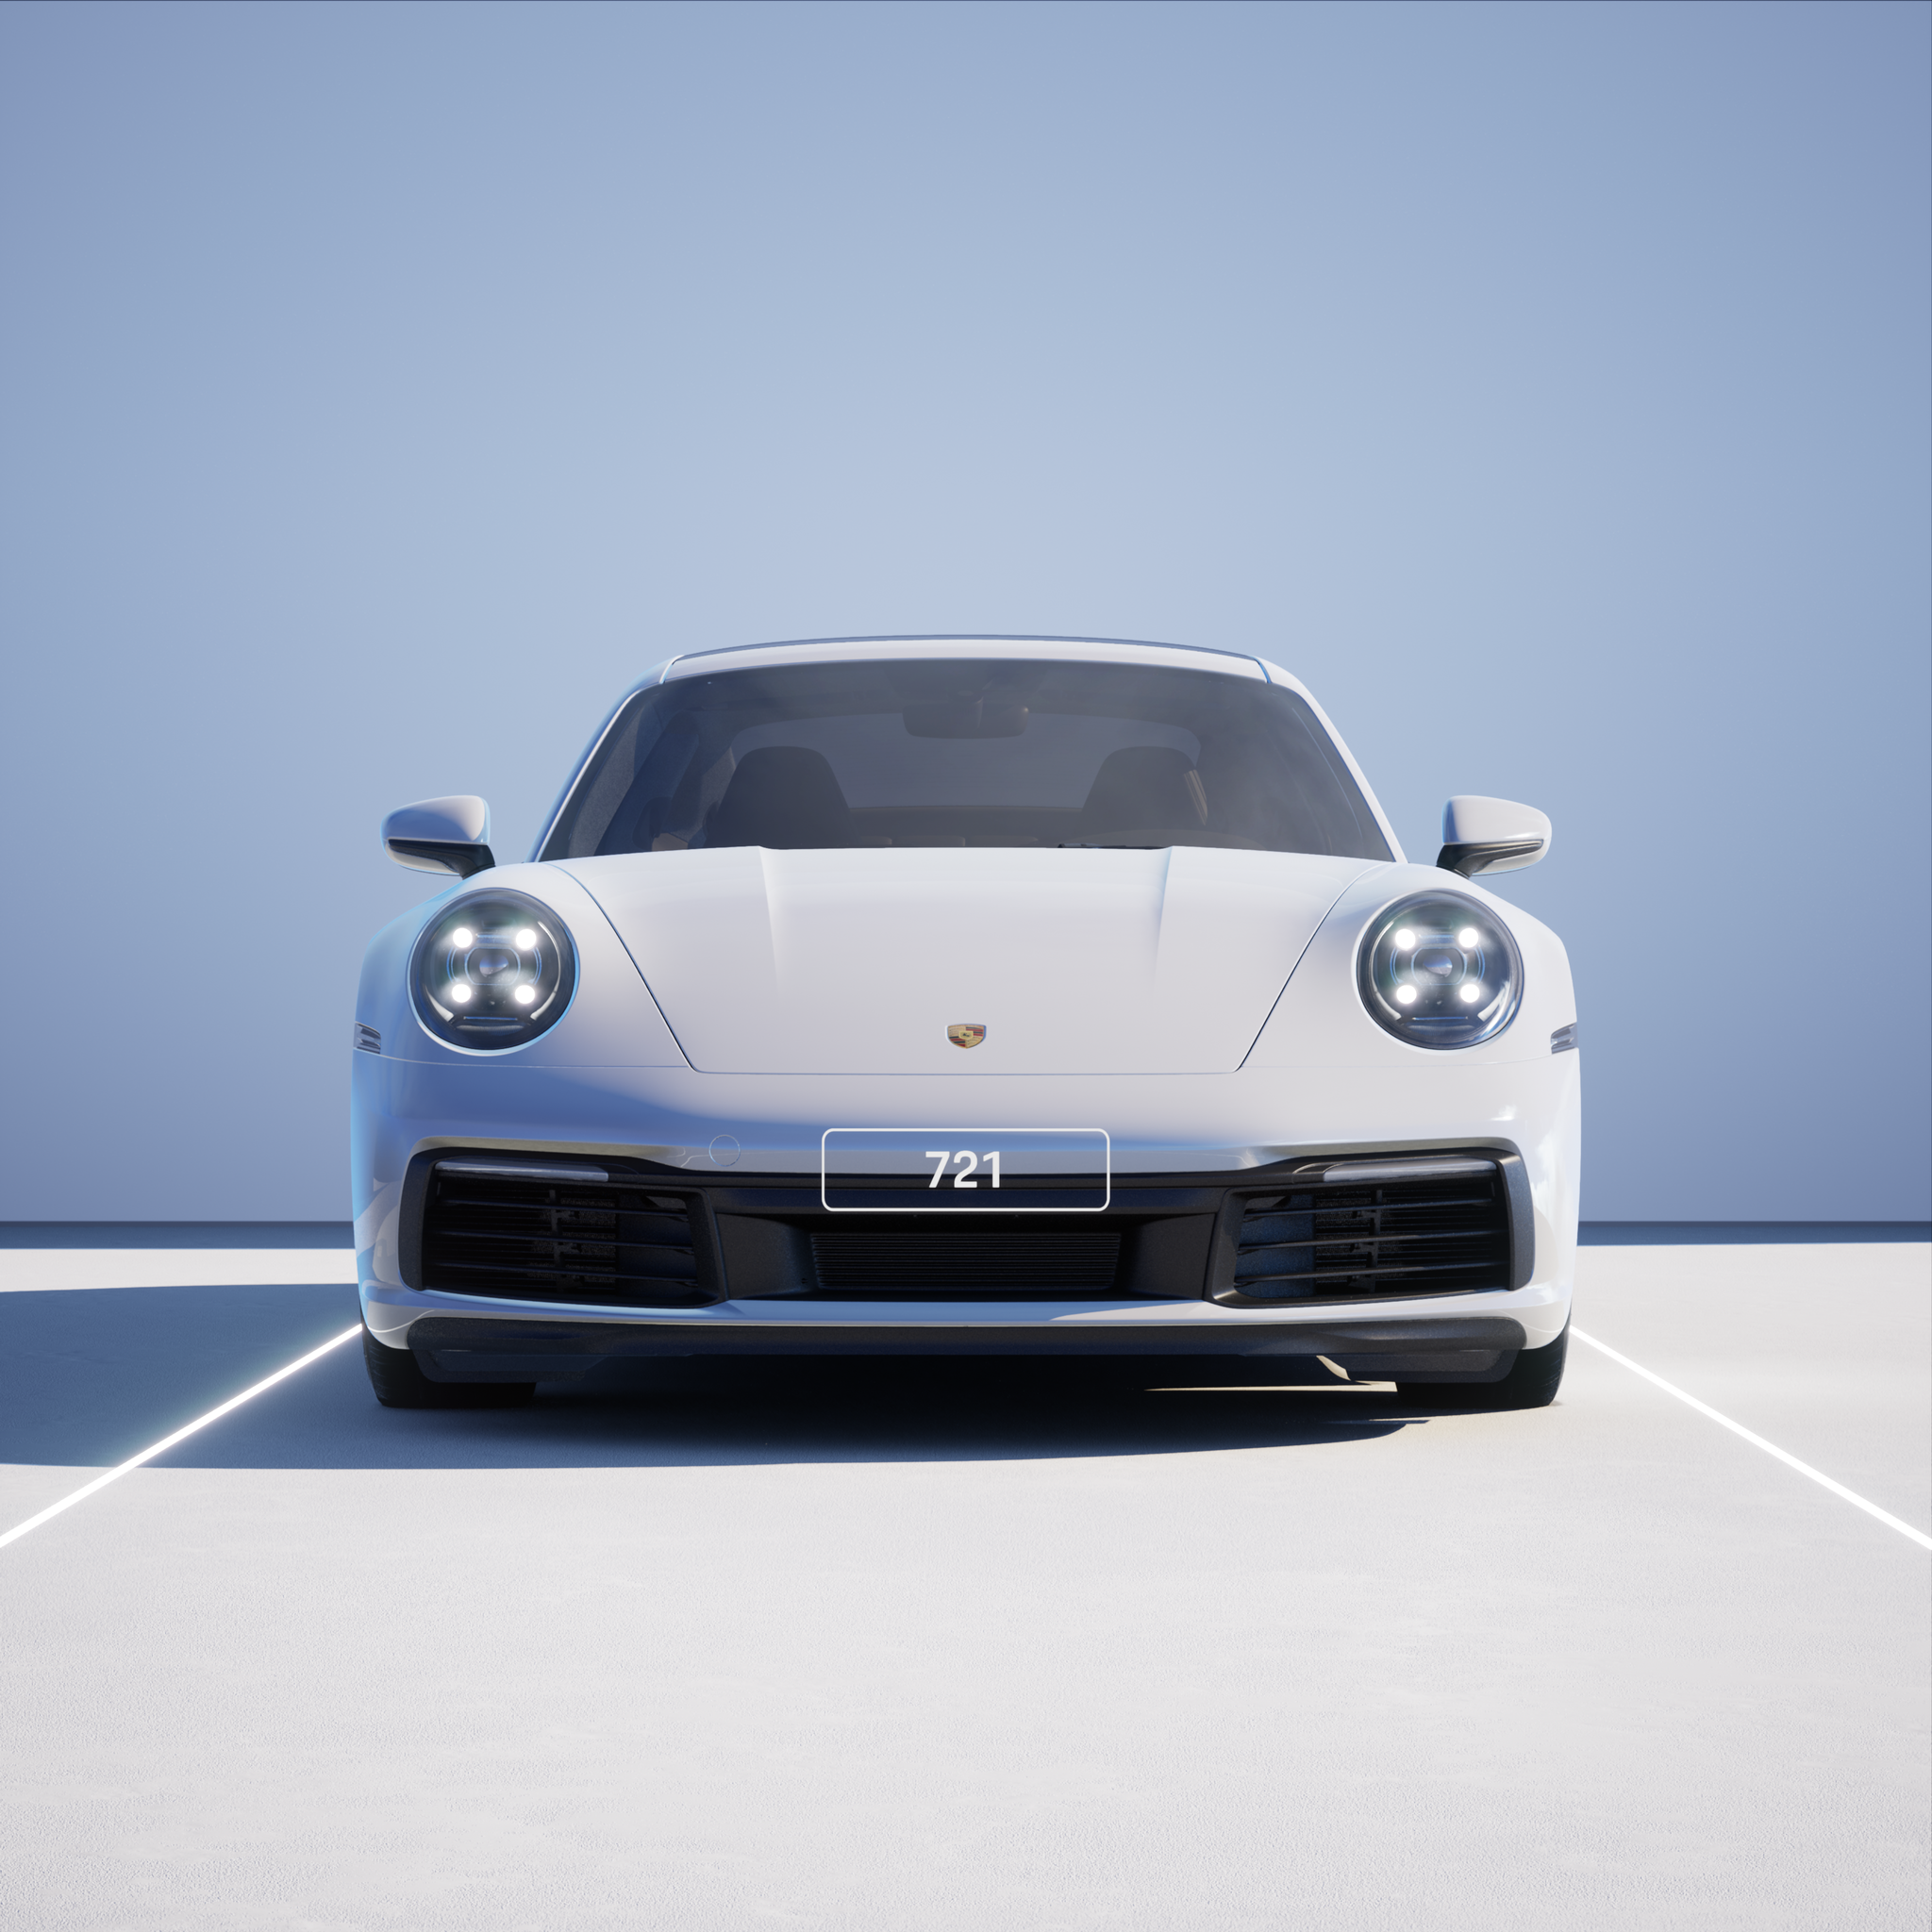 The PORSCHΞ 911 721 image in phase